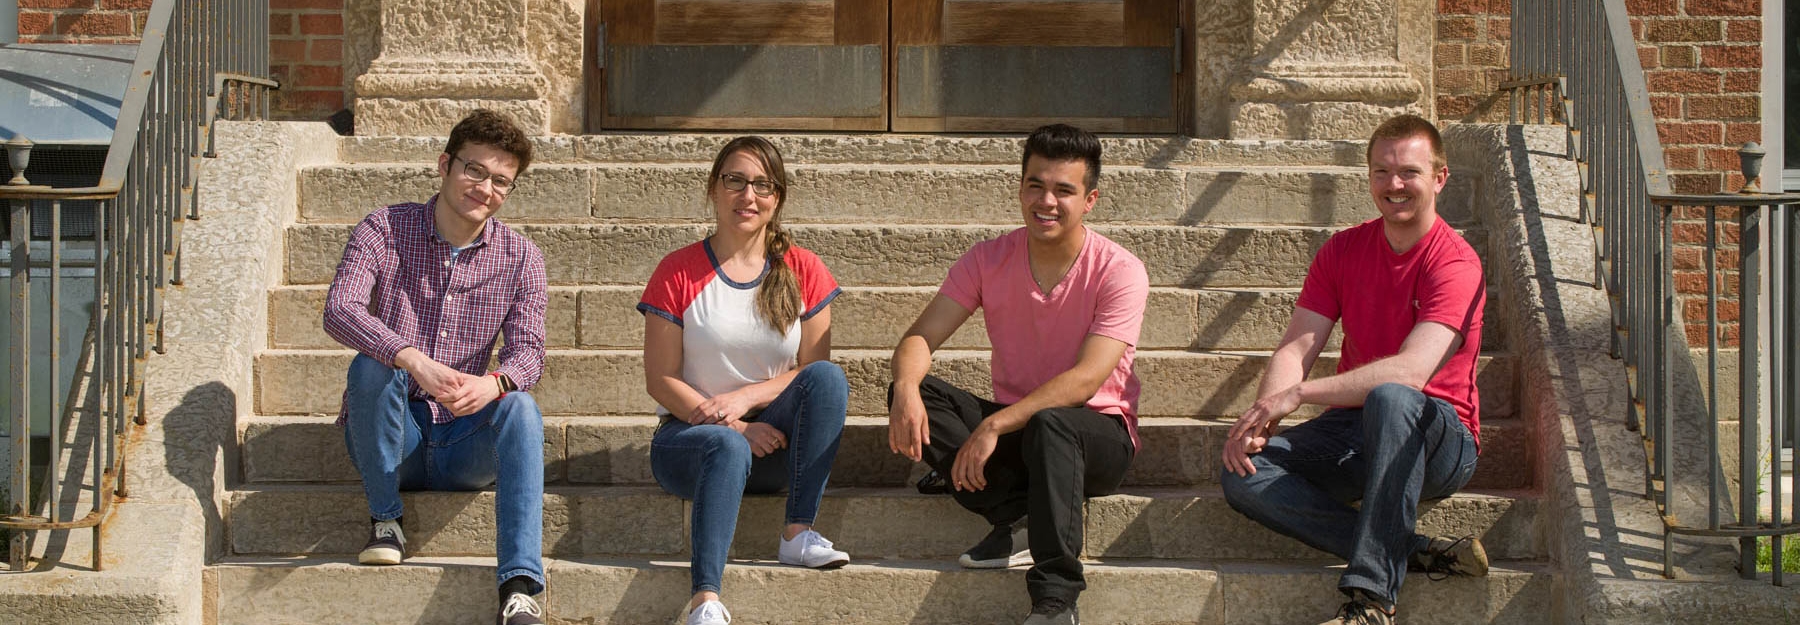 Students sitting on concrete steps